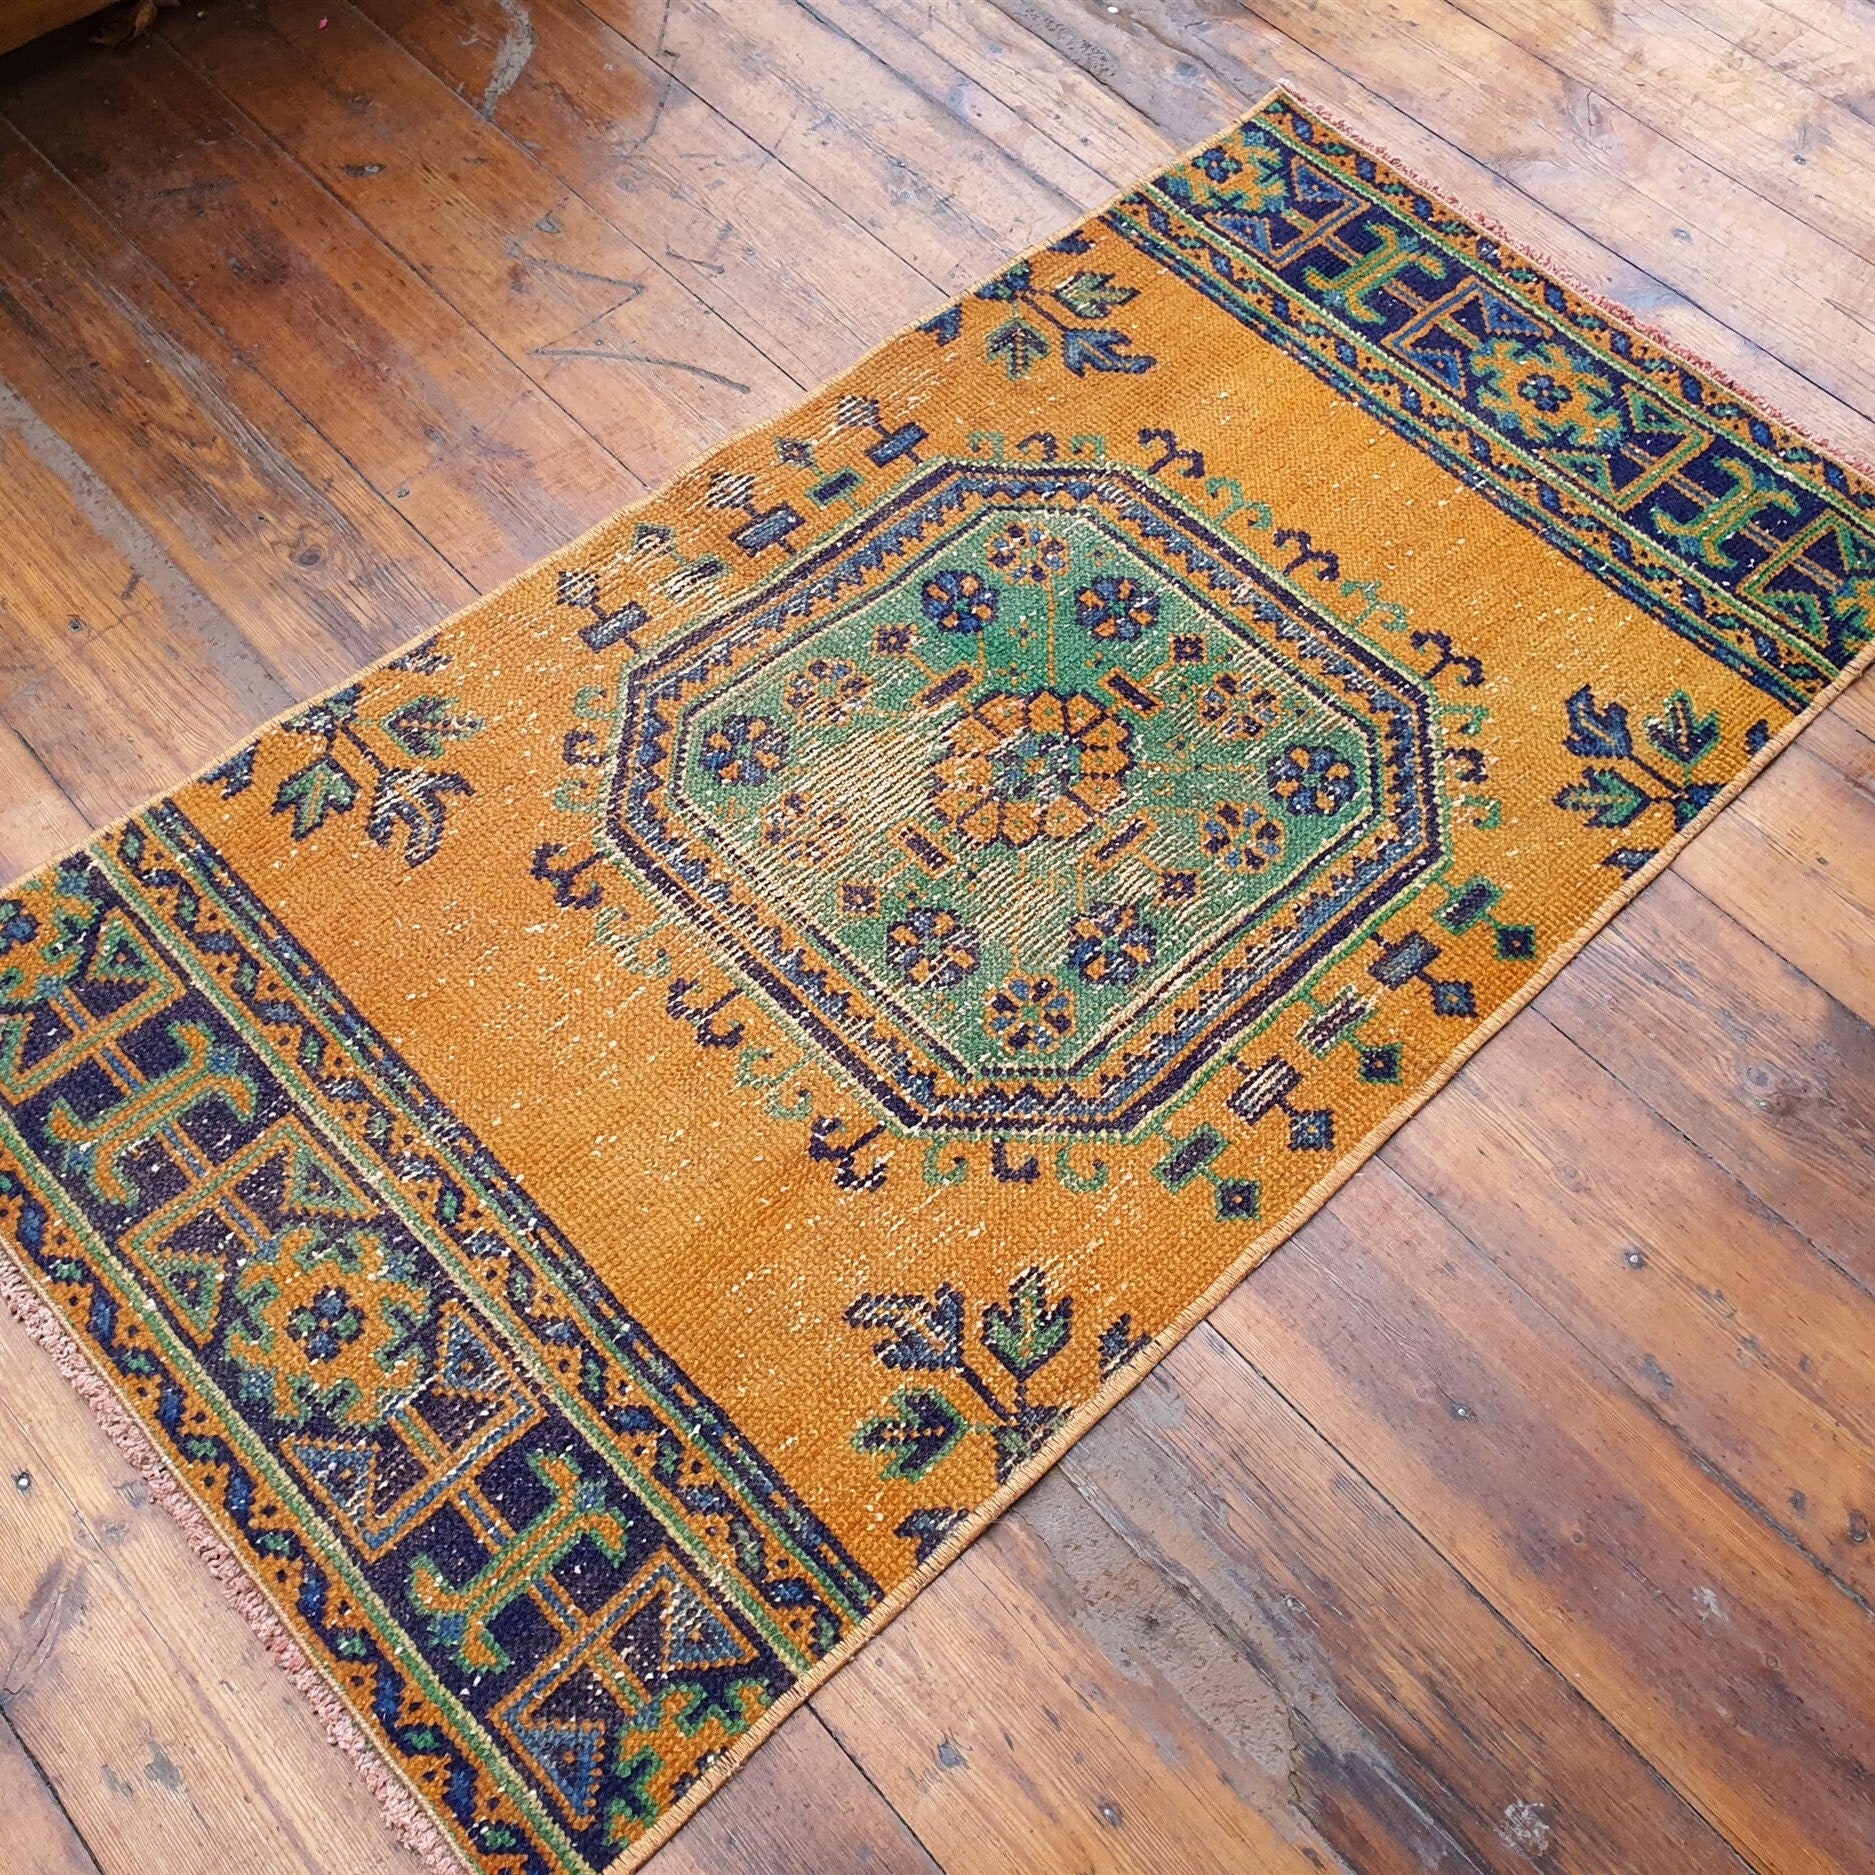 Small Turkish Rug, 4 ft 1 in x 2 ft 1 in, Apricot Orange and Teal Green Vintage Faded Distressed Door Mat